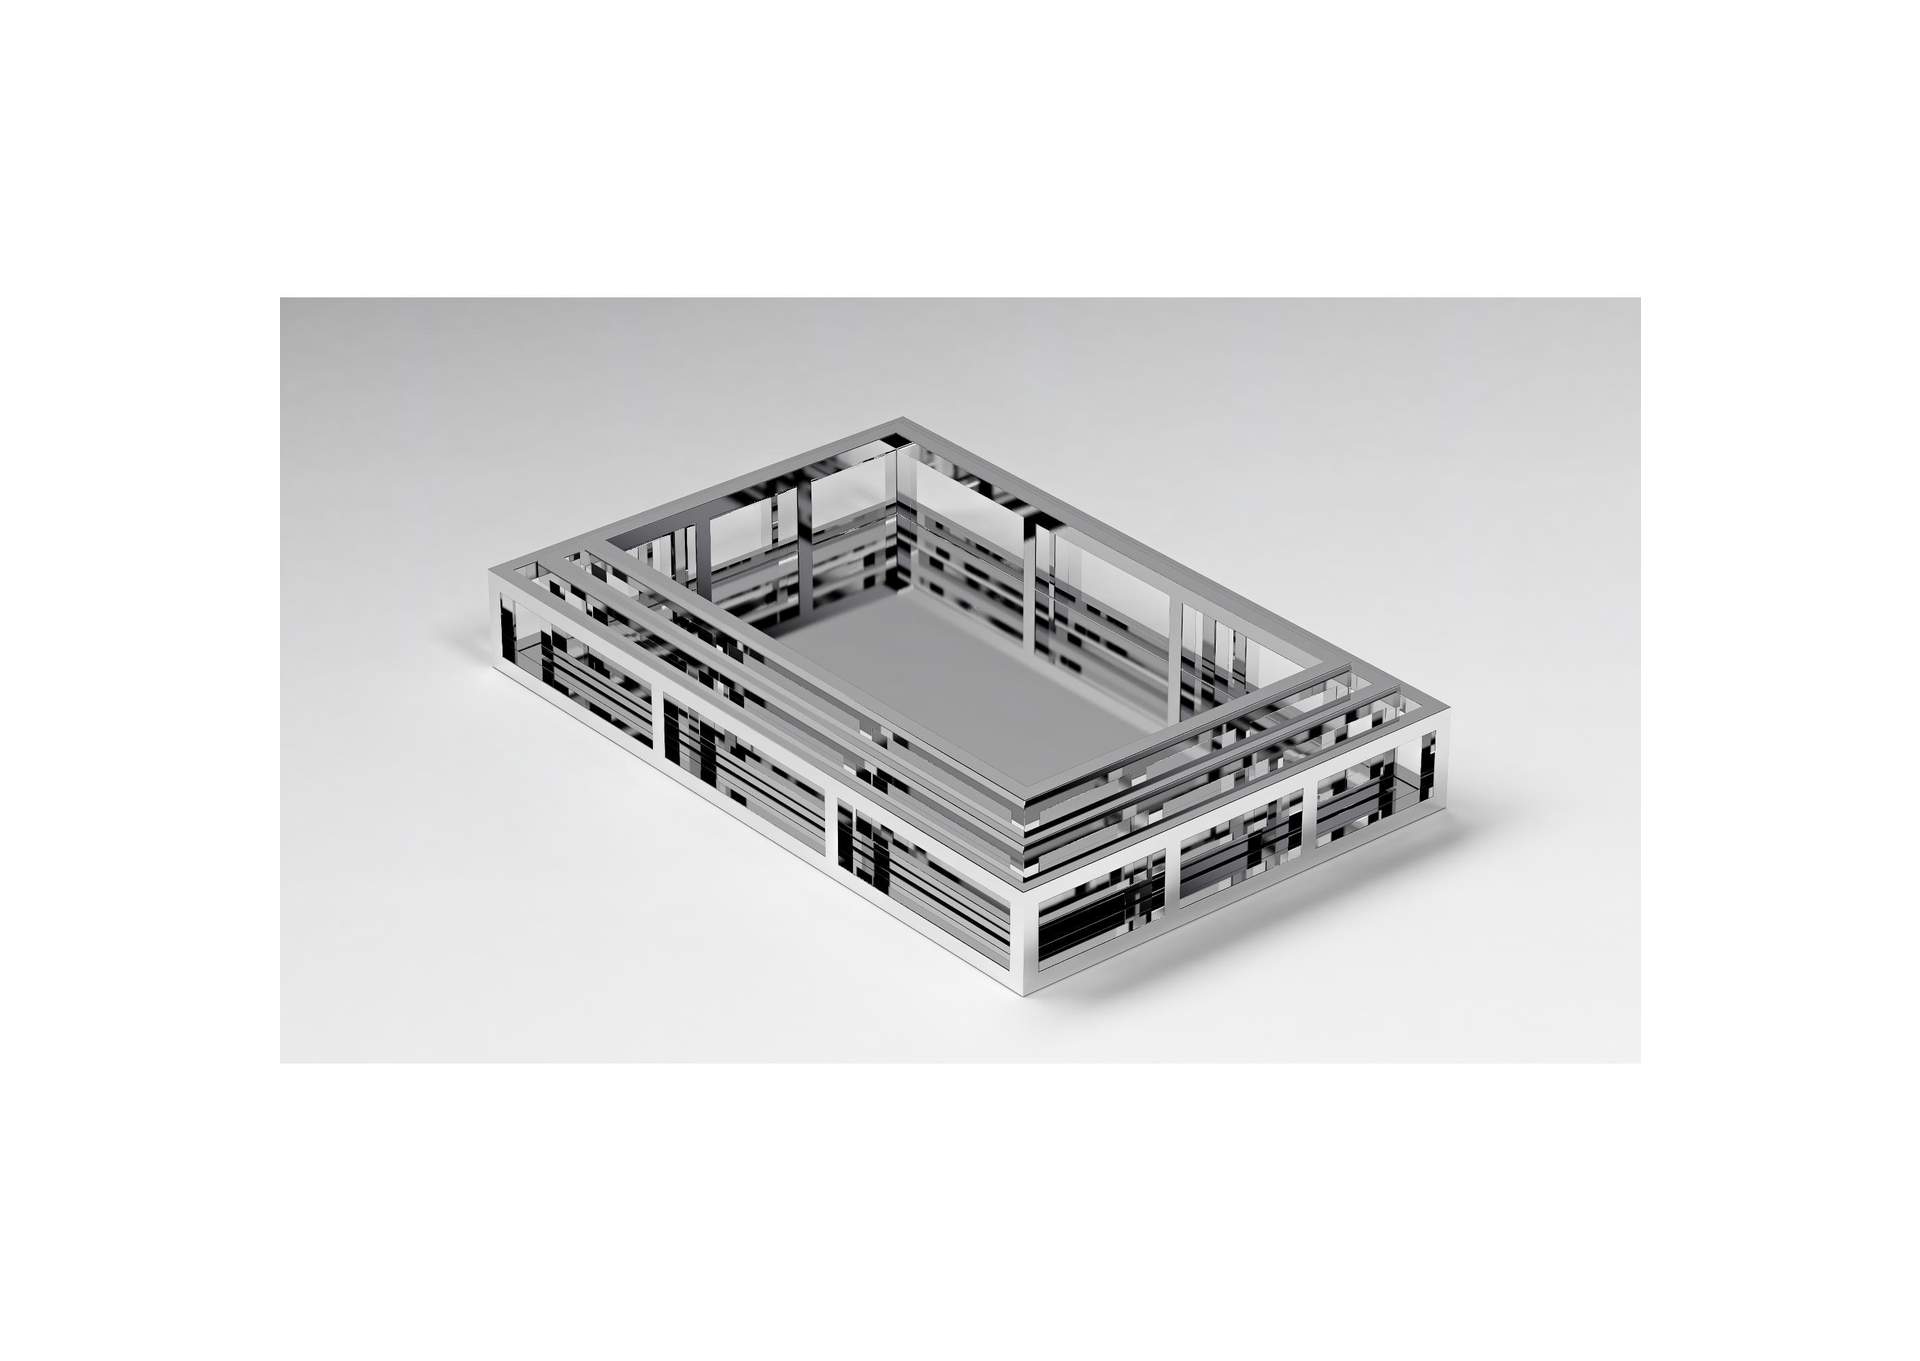 Rectangular Stainless Steel Mirrored Nesting Trays,Chintaly Imports